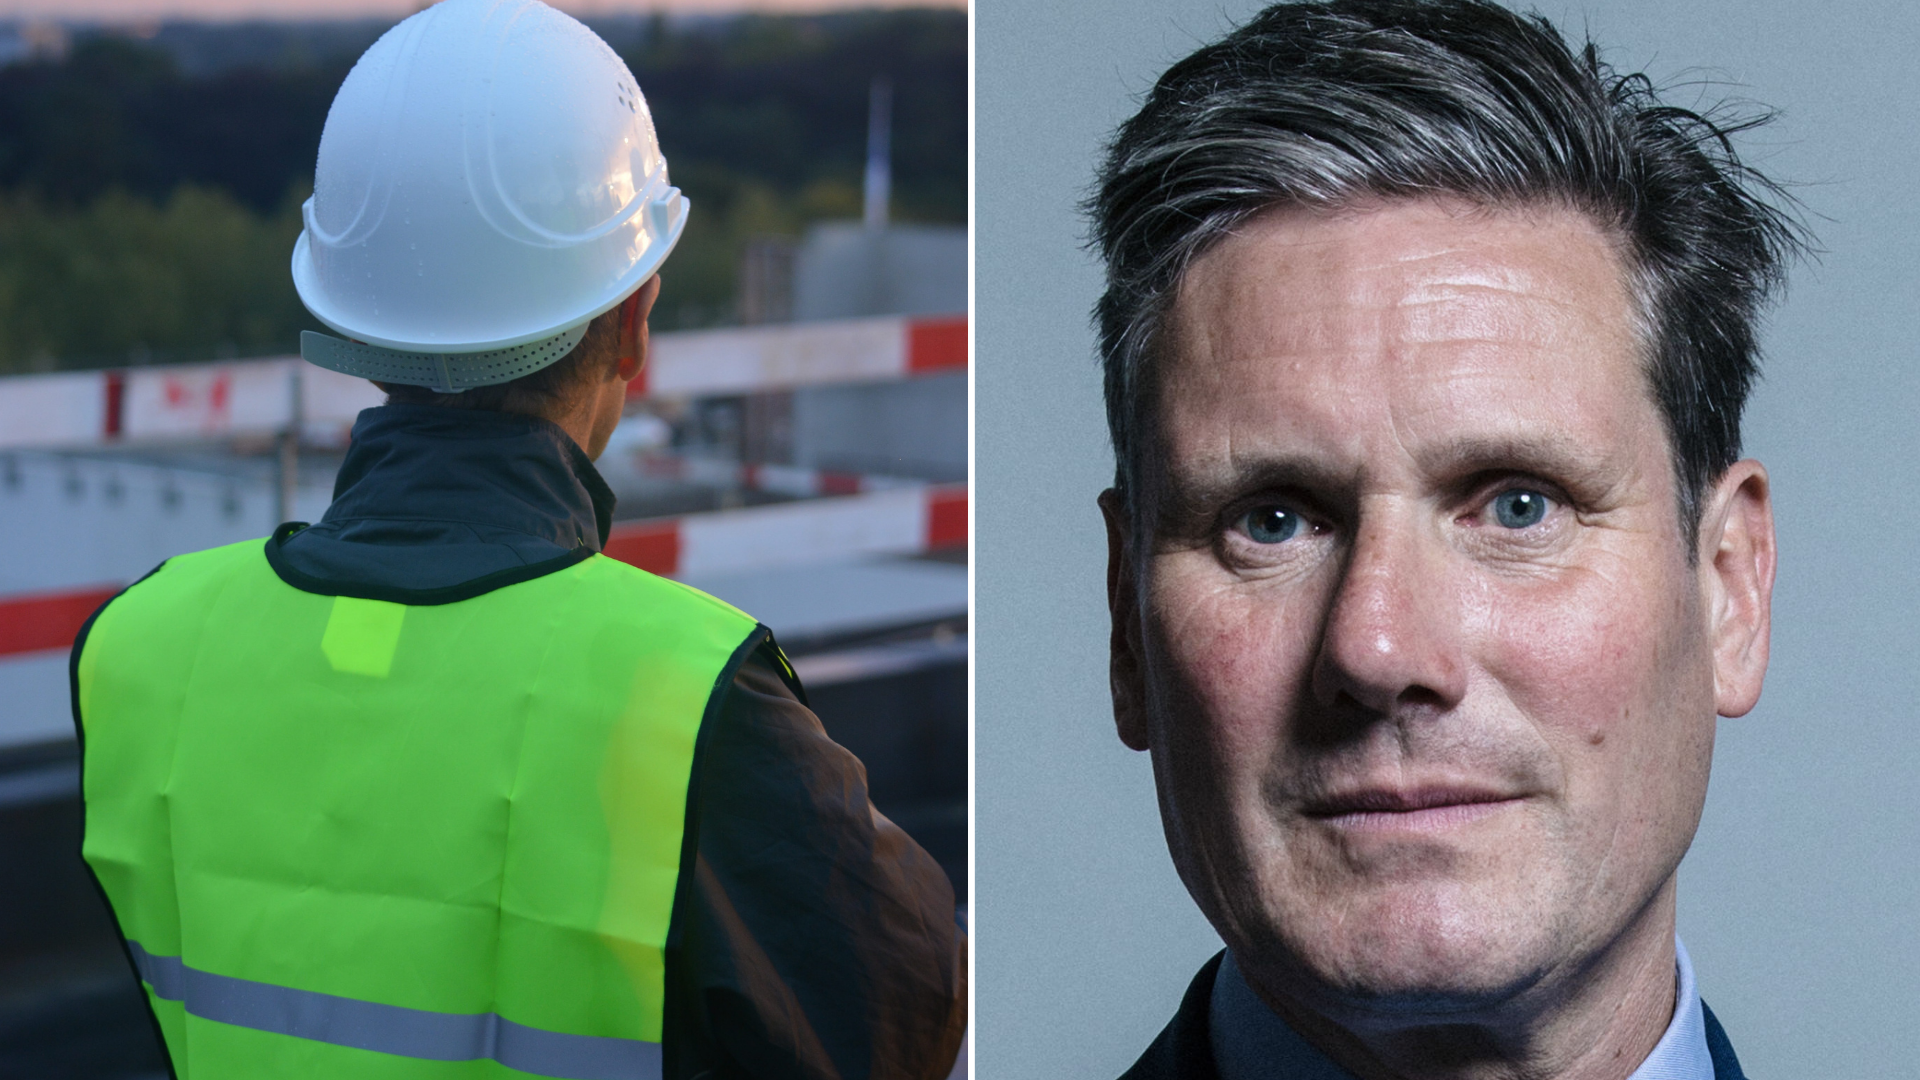 Experts have weighted in on how Keir Starmer’s plans for green jobs stack up. Image credit: Piqsels / Chris McAndrew